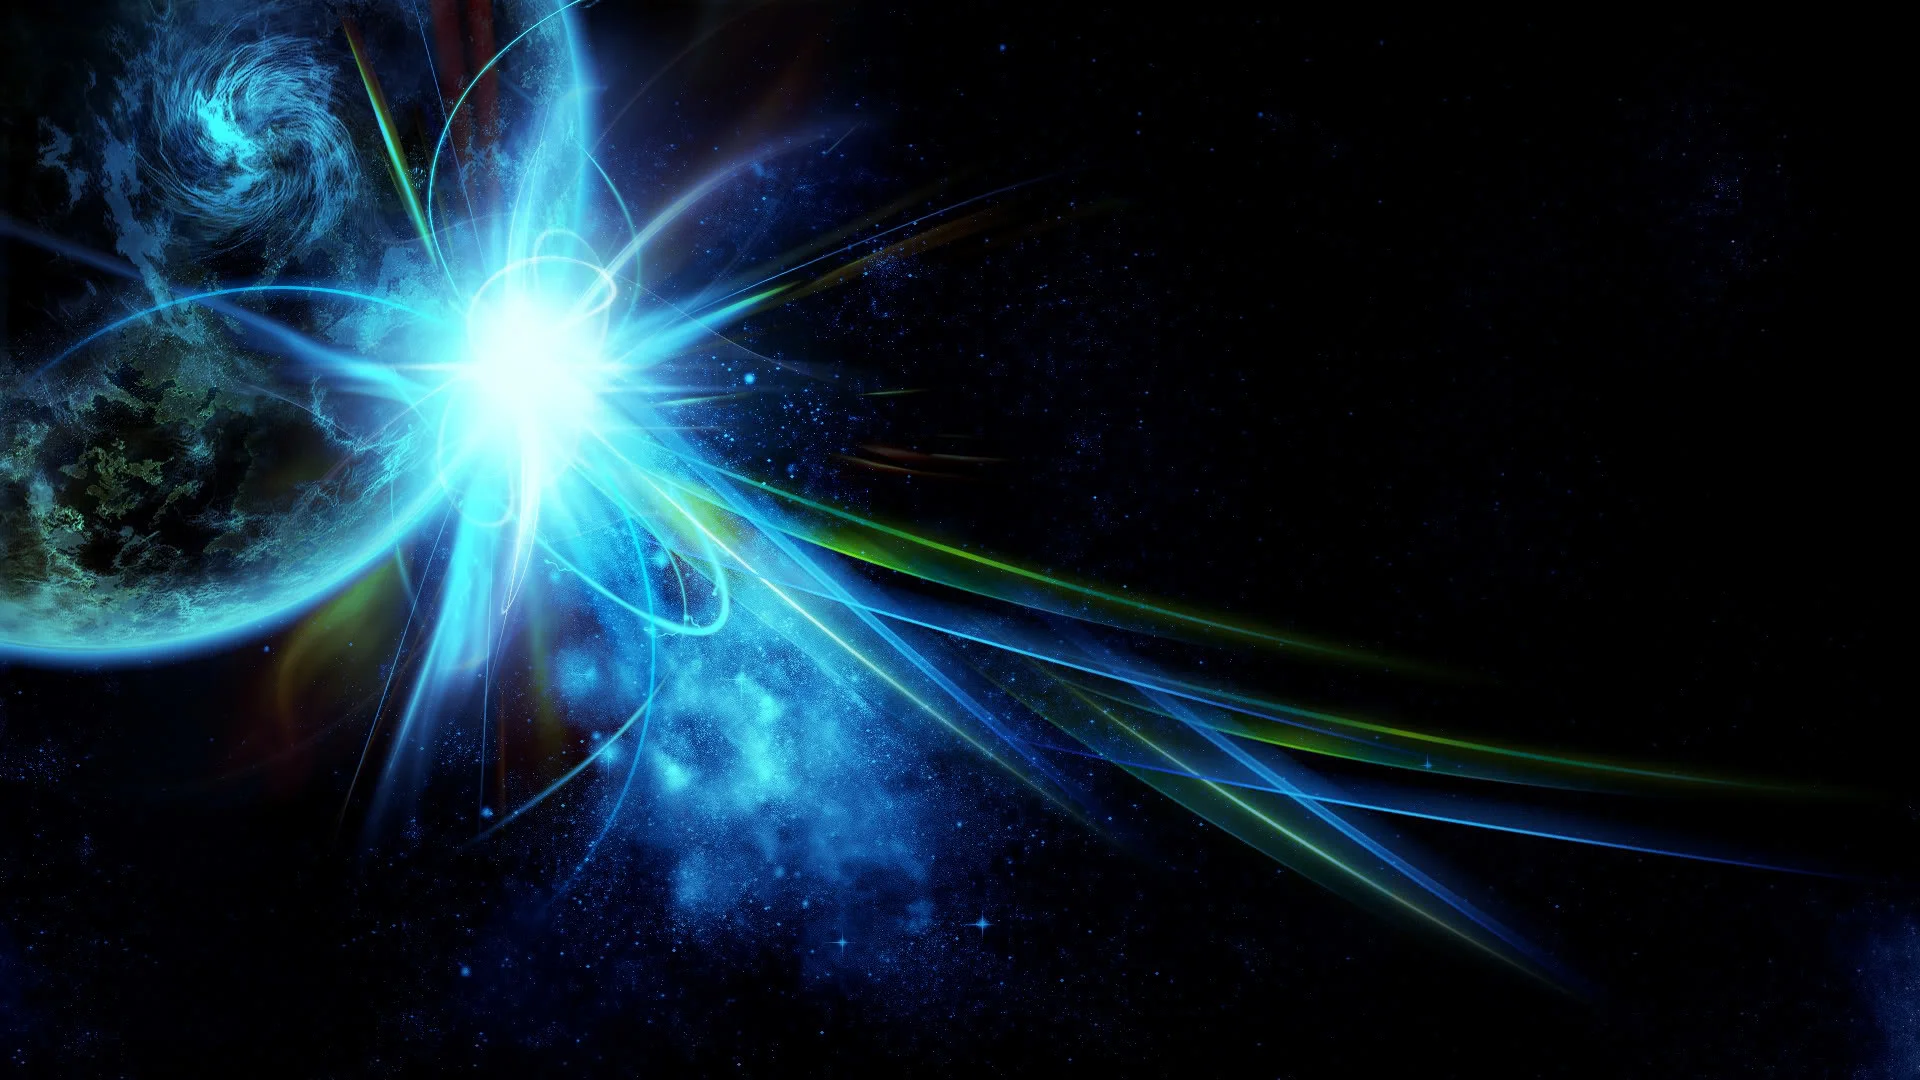 Quantum Space wallpaper for your